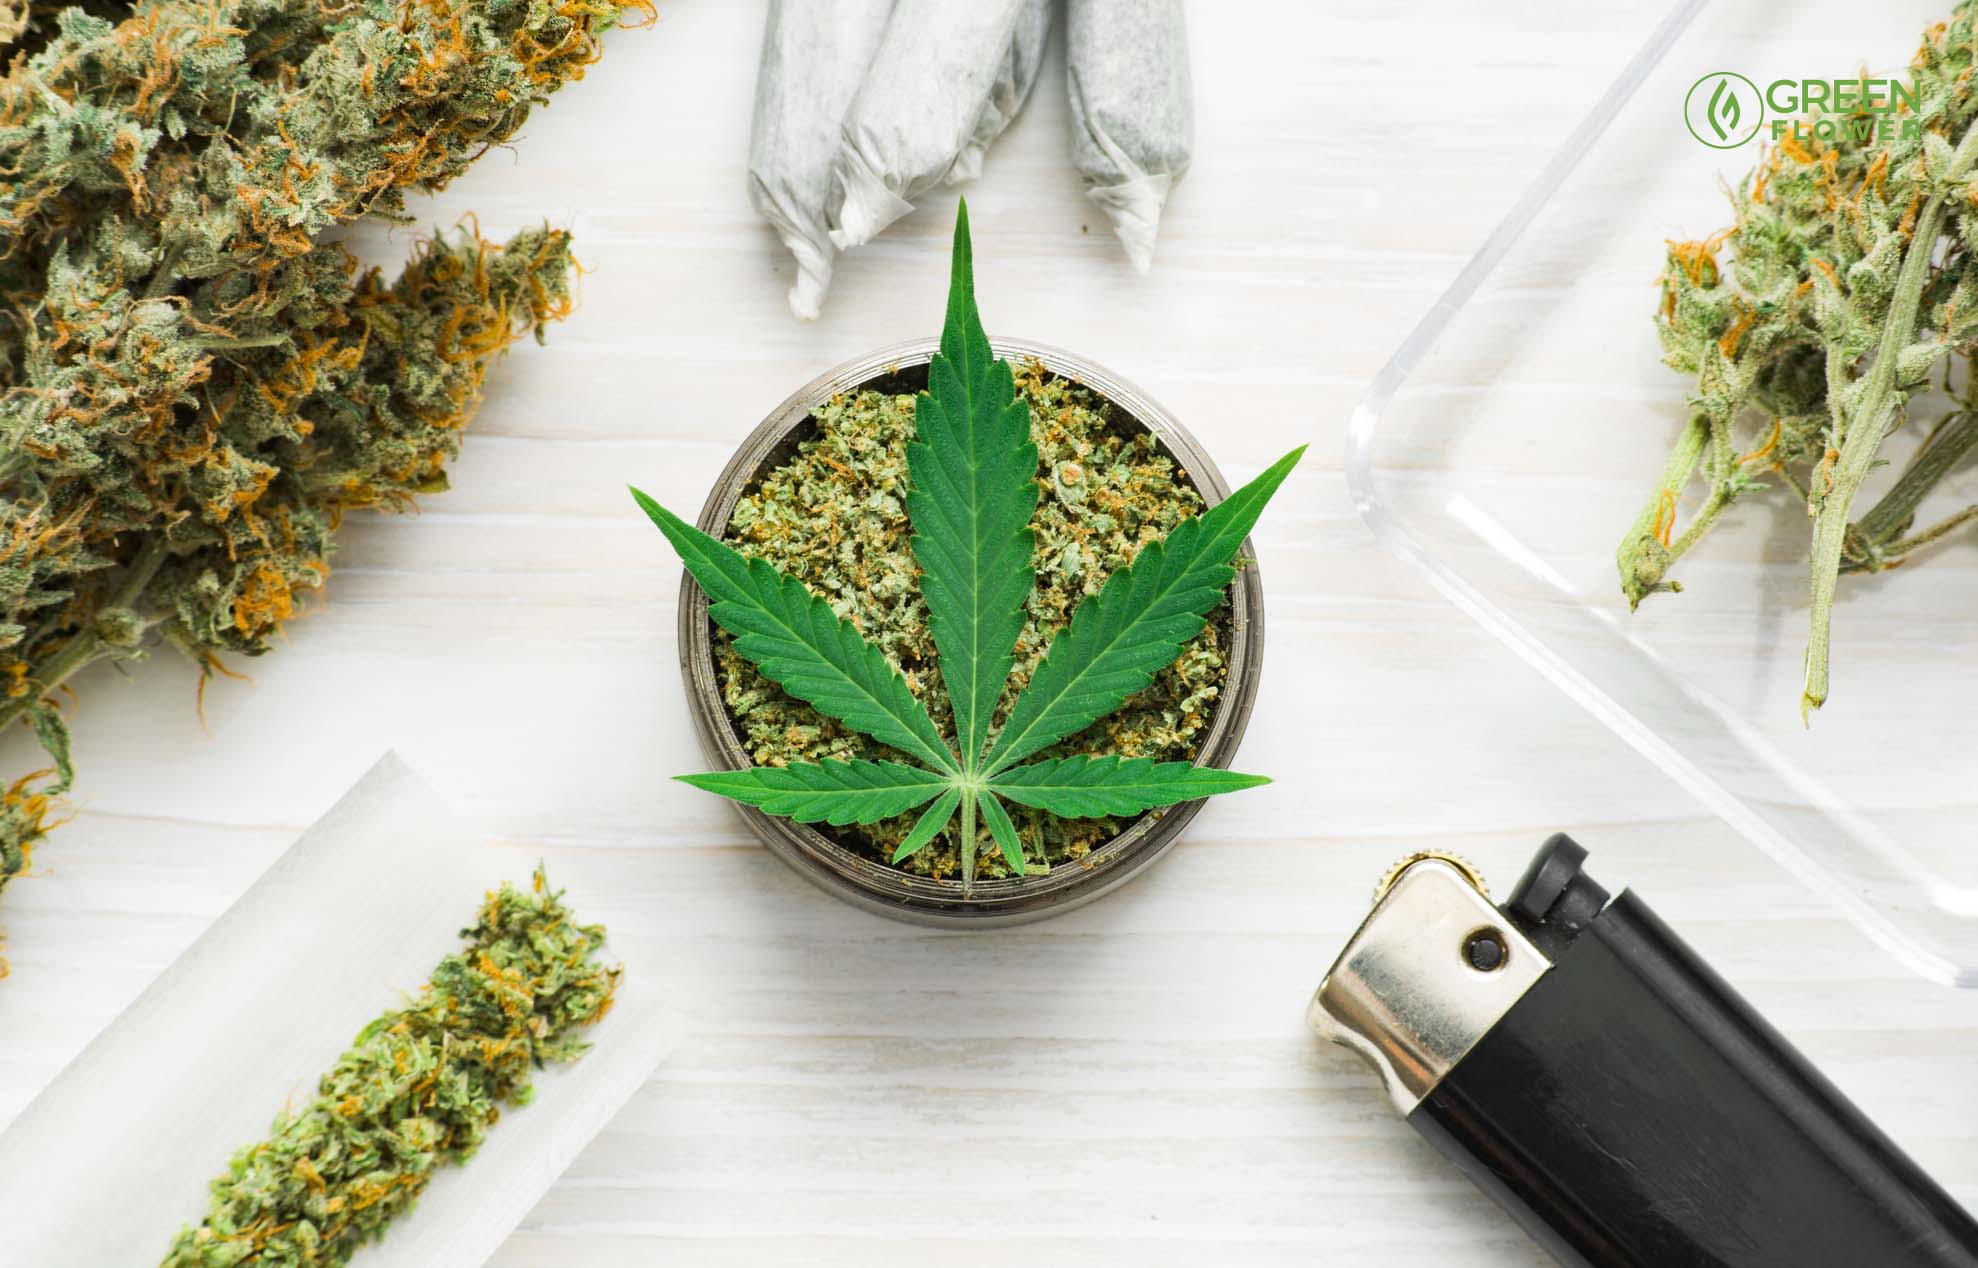 What Is Your Favorite Way To Consume Cannabis? | Green Flower News